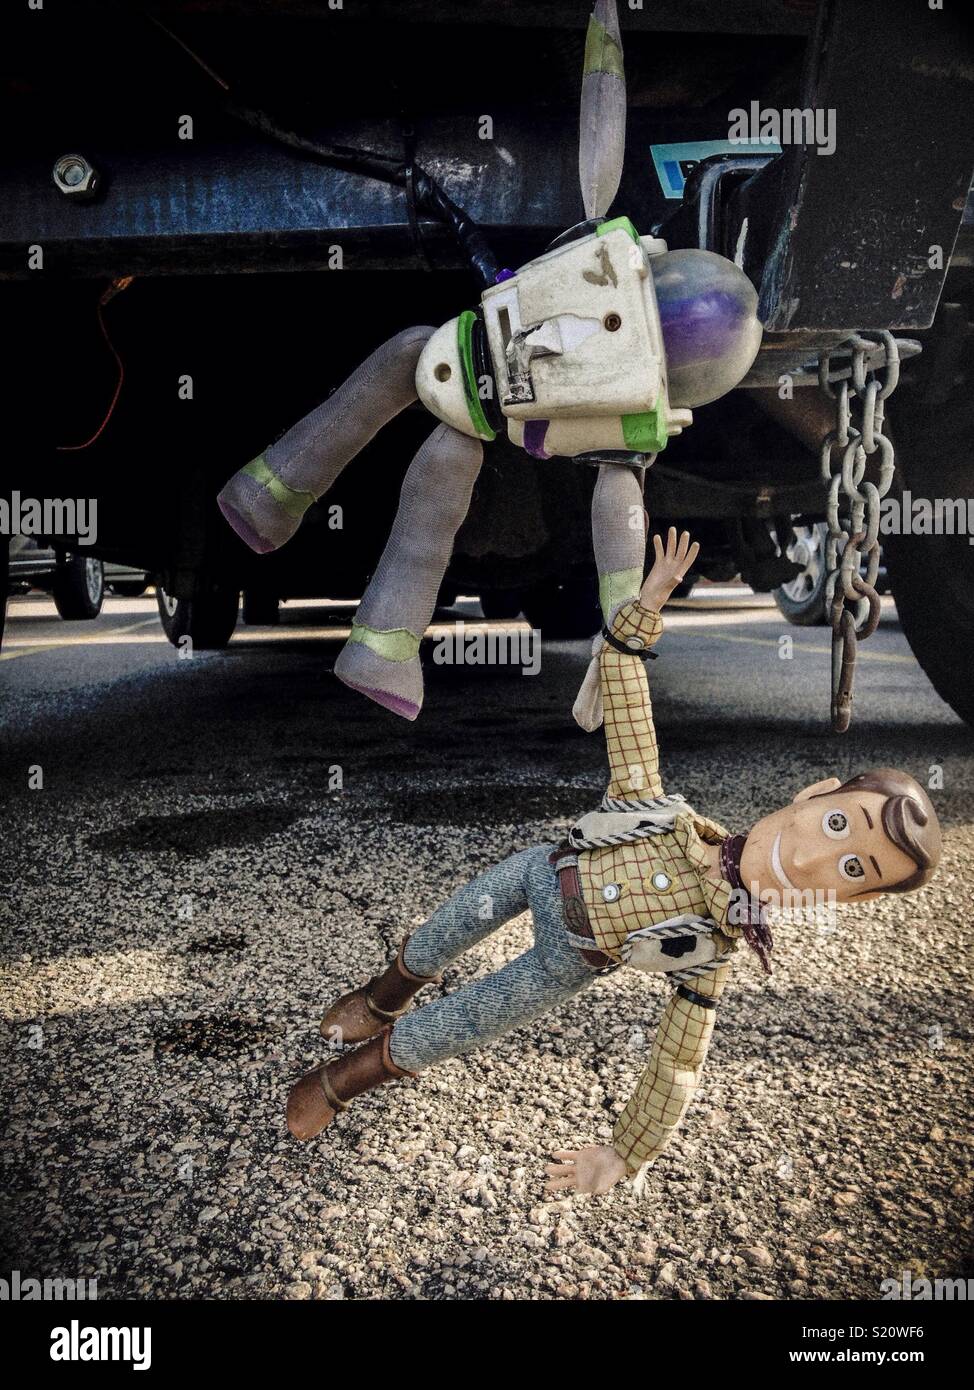 Buzz Lightyear and Woody toys clinging to bumper of vehicle in North Carolina parking lot Stock Photo